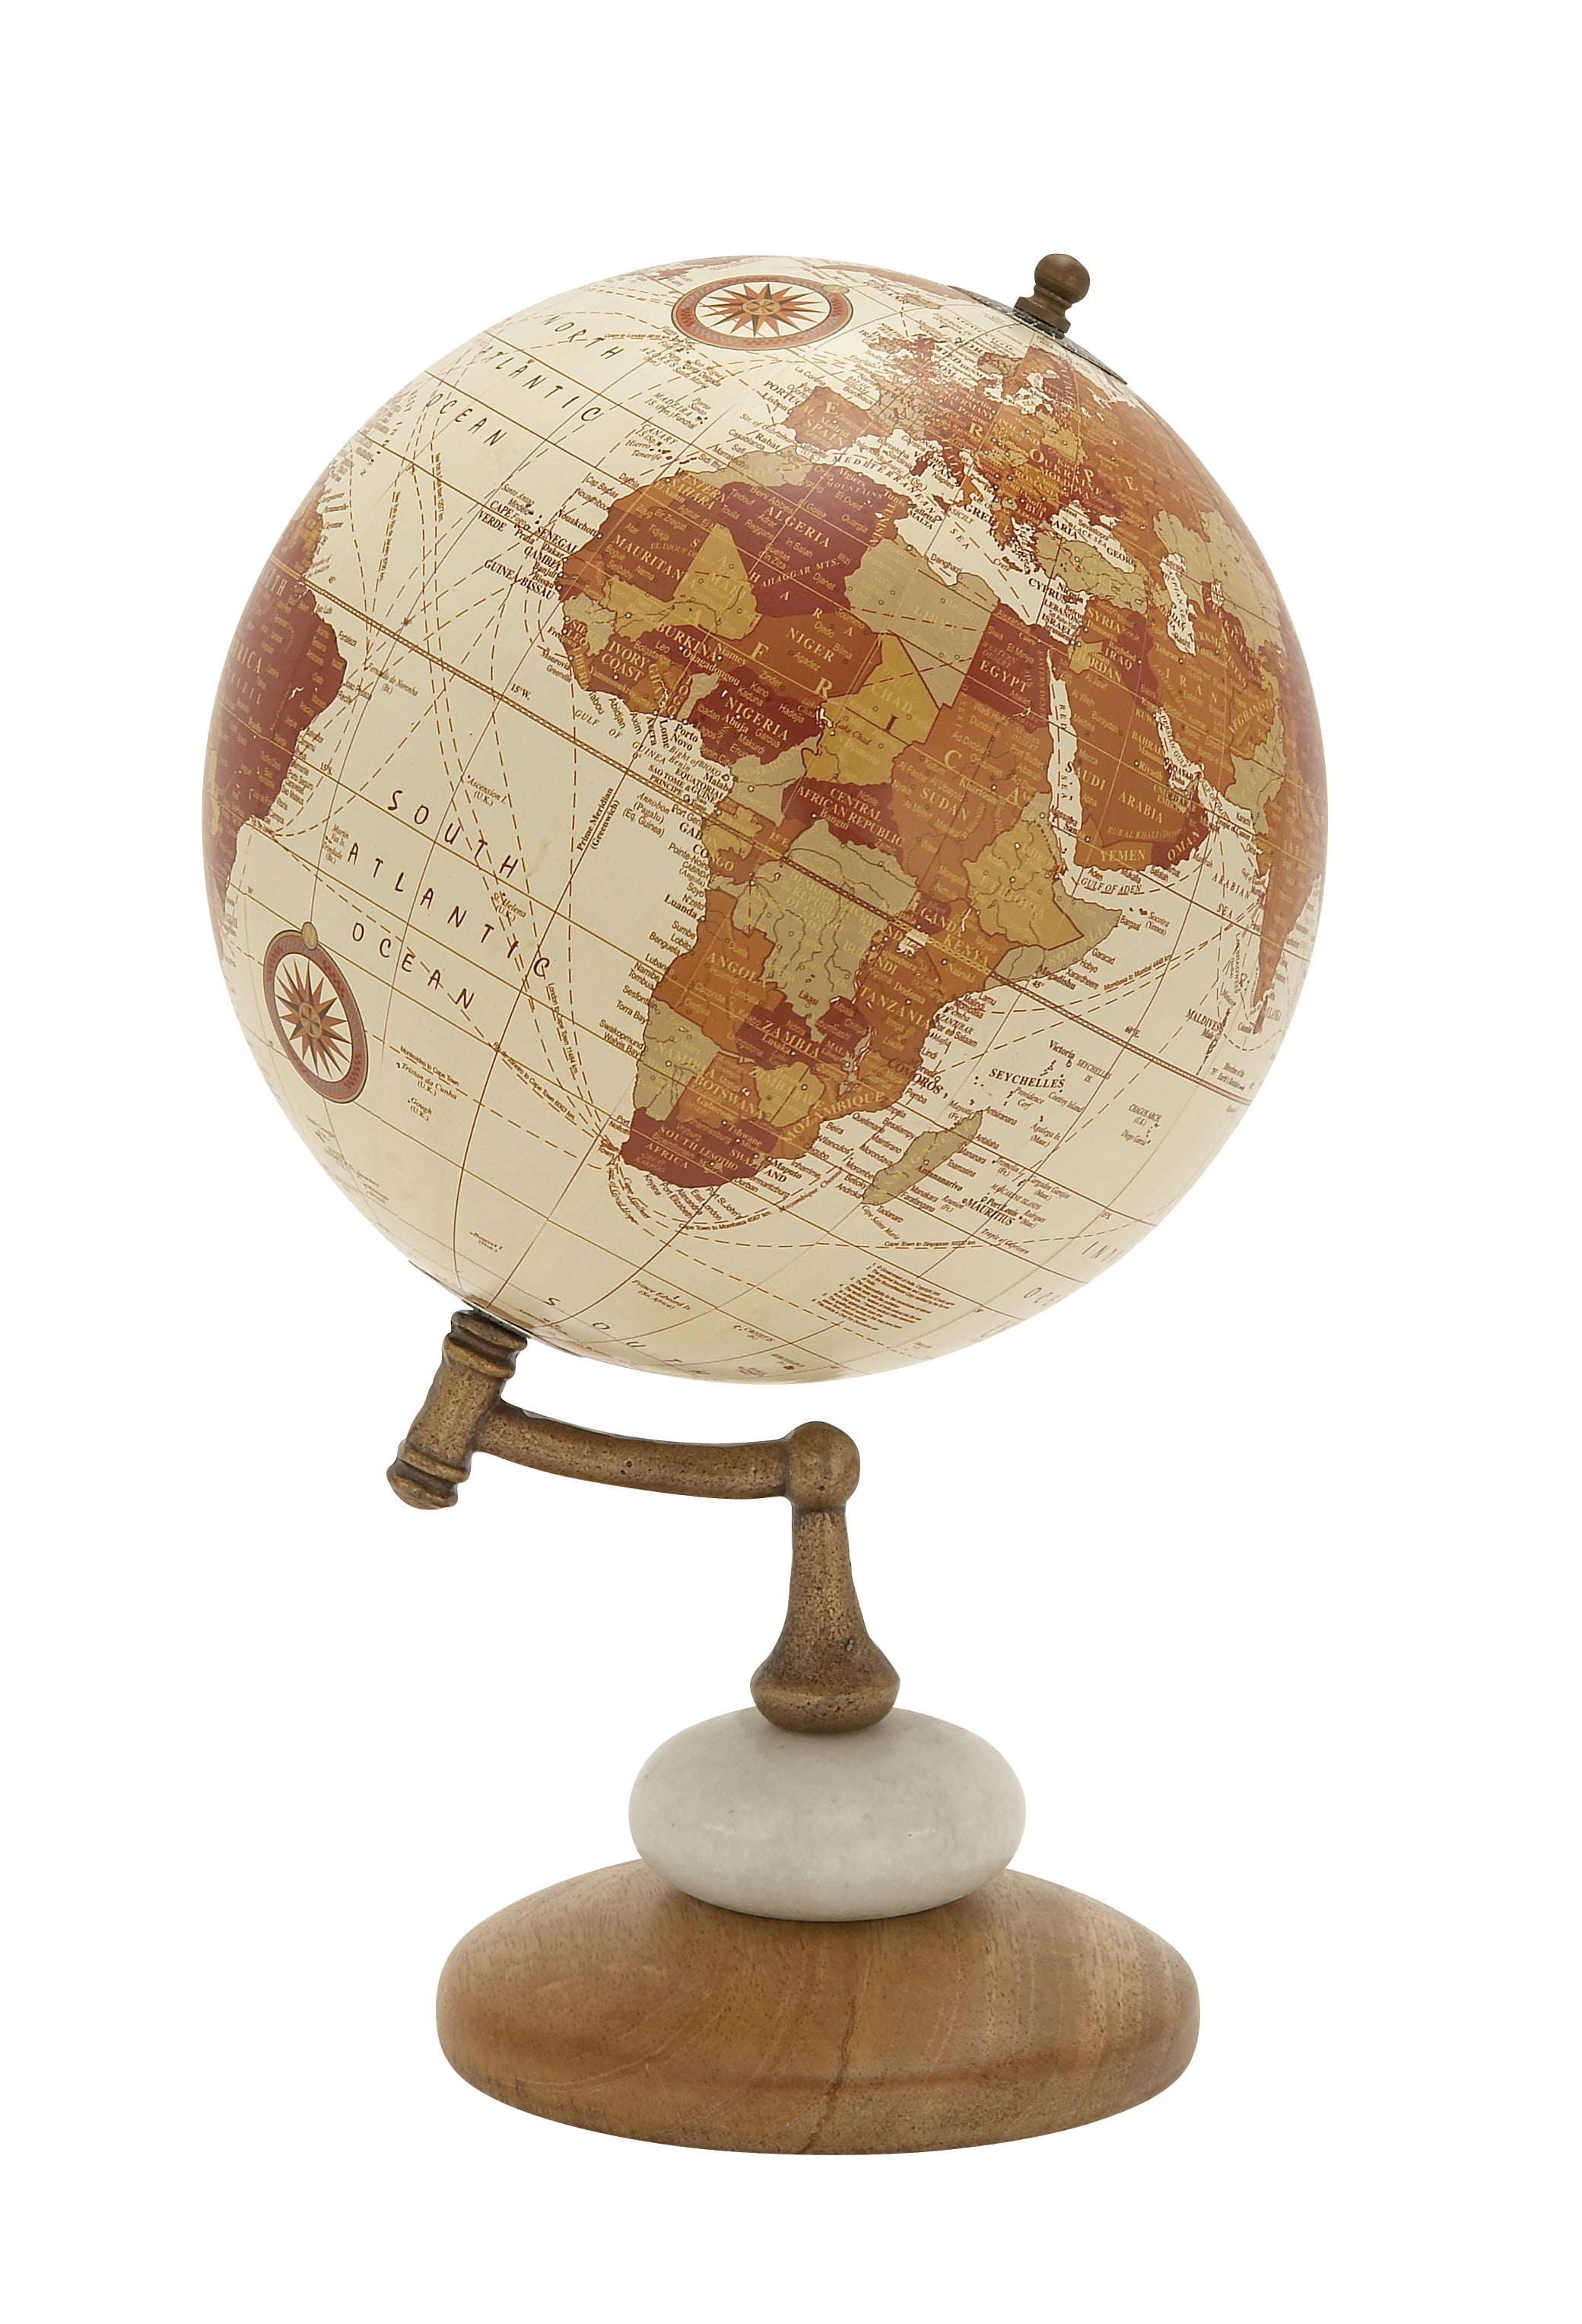 8 Inches x 5 Inches Deco 79 Iron World Globe with Marble Base Black/White/Silver